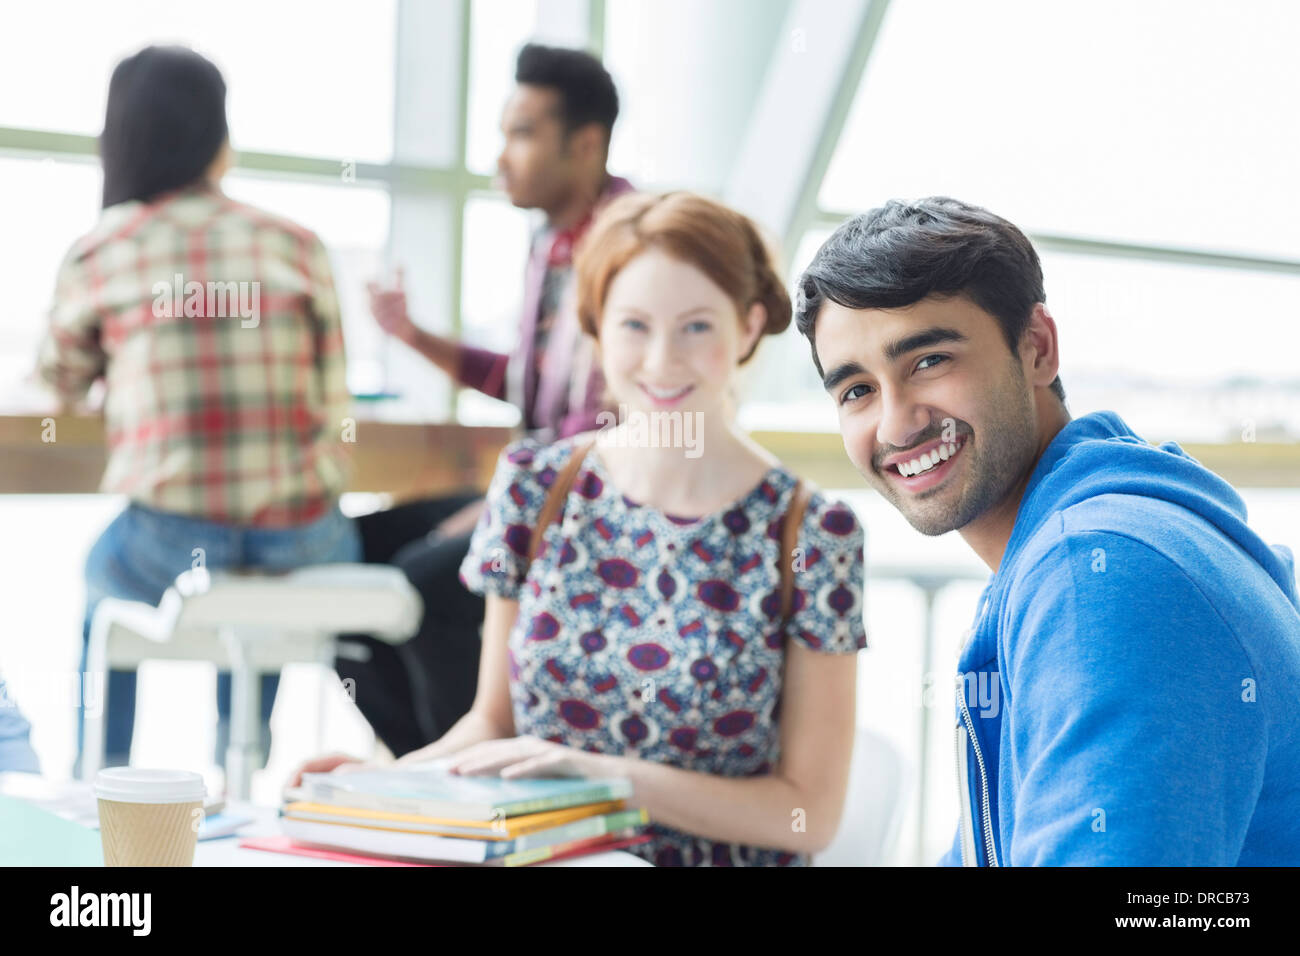 Students smiling in cafe Stock Photo